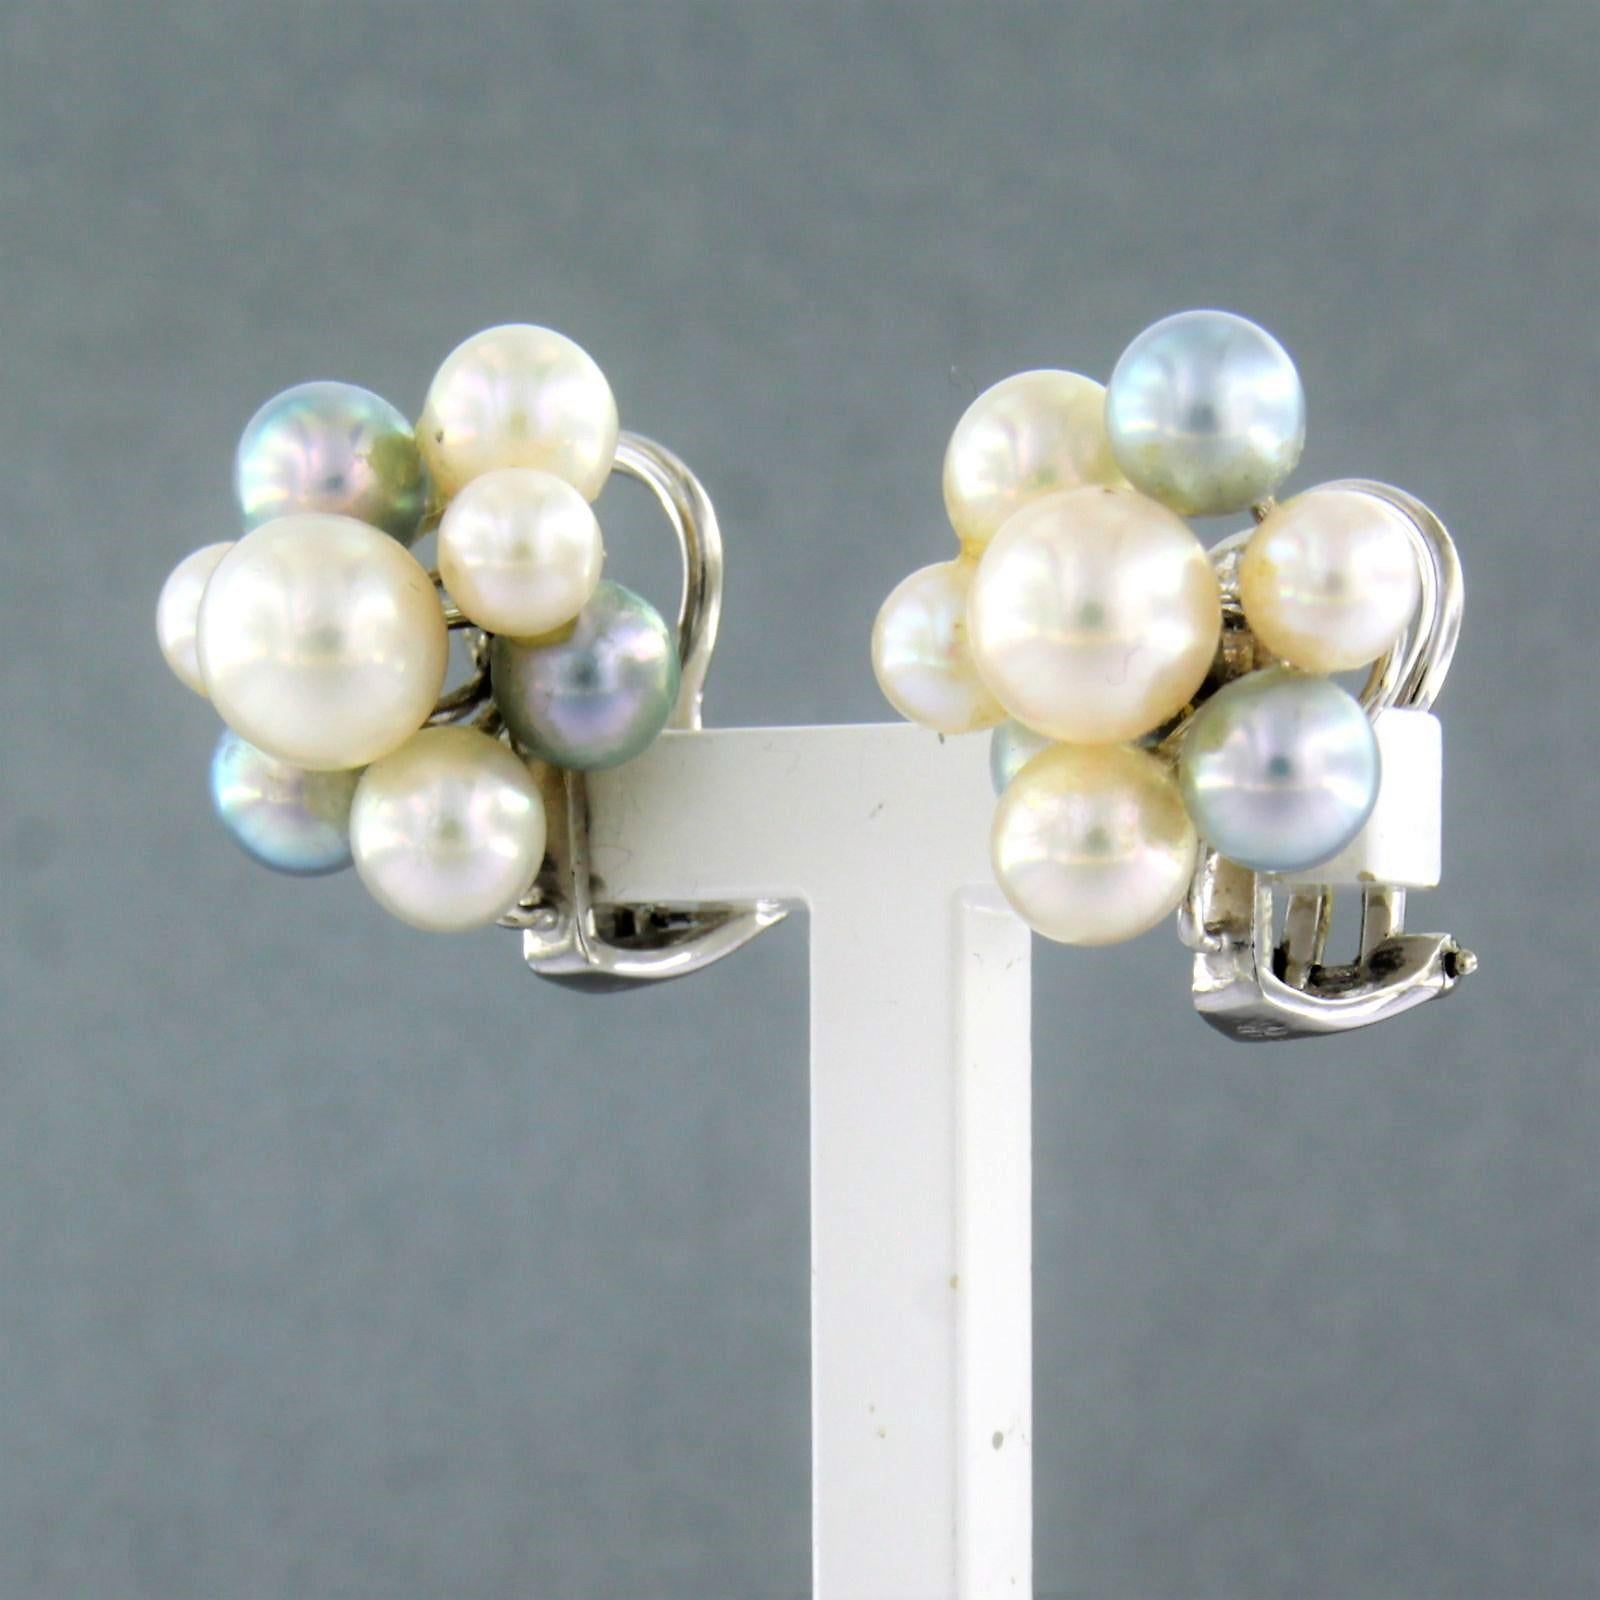 Bead Earrings set with pearls 18k white gold